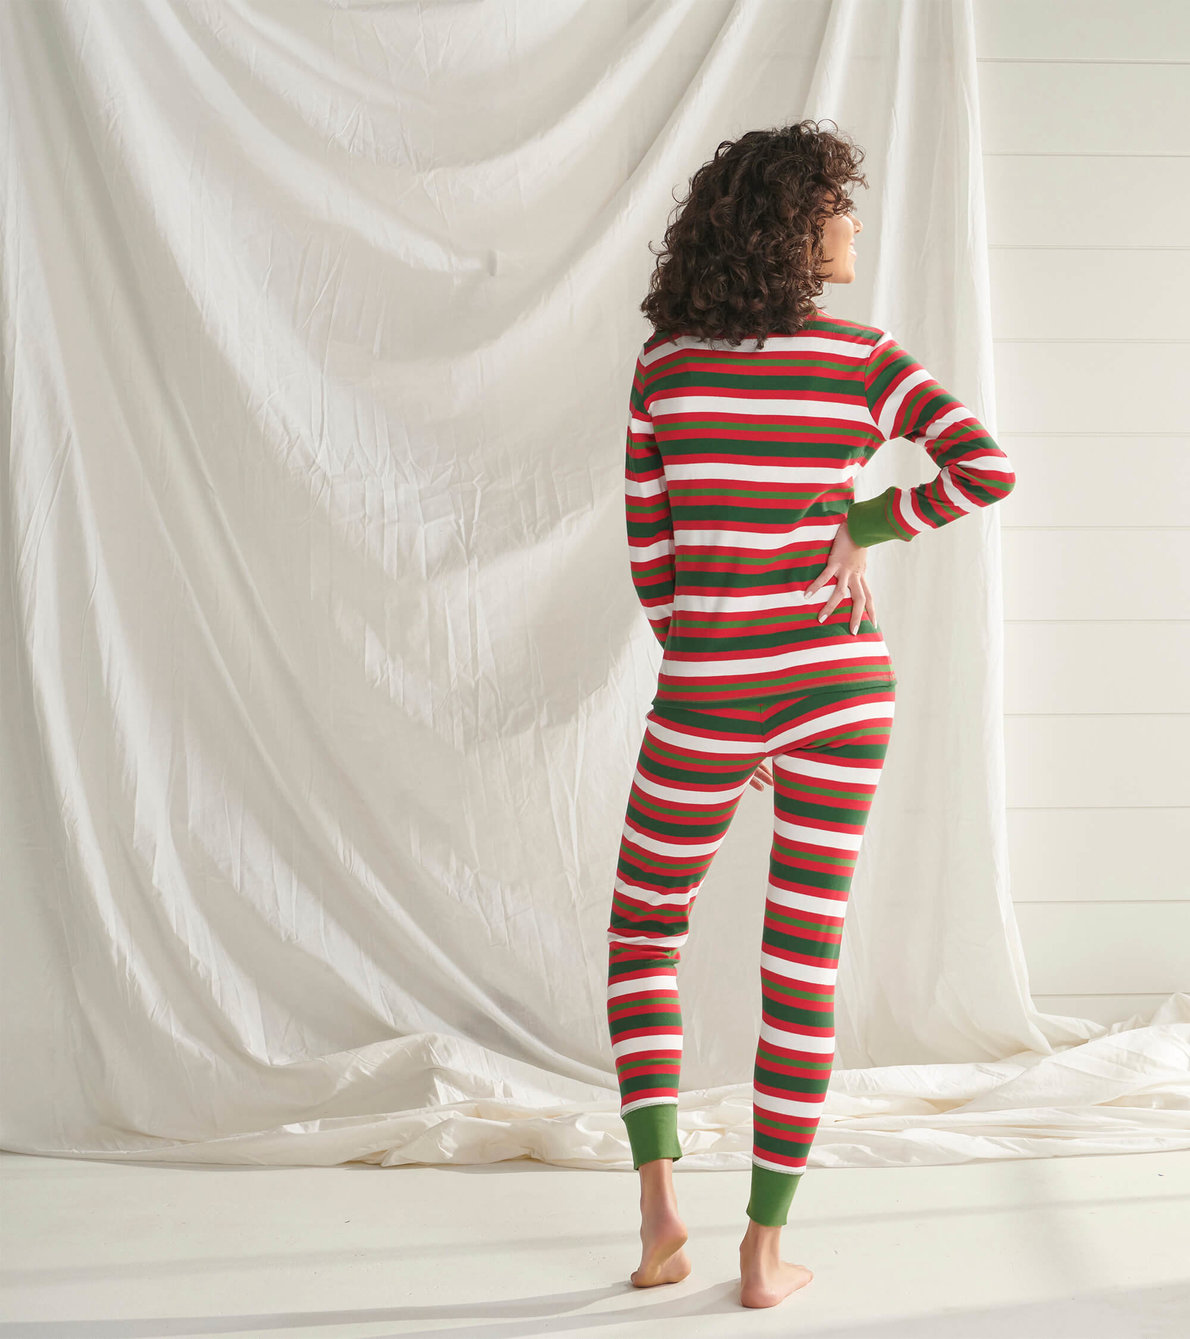 View larger image of Candy Cane Stripes Women's Pajama Set